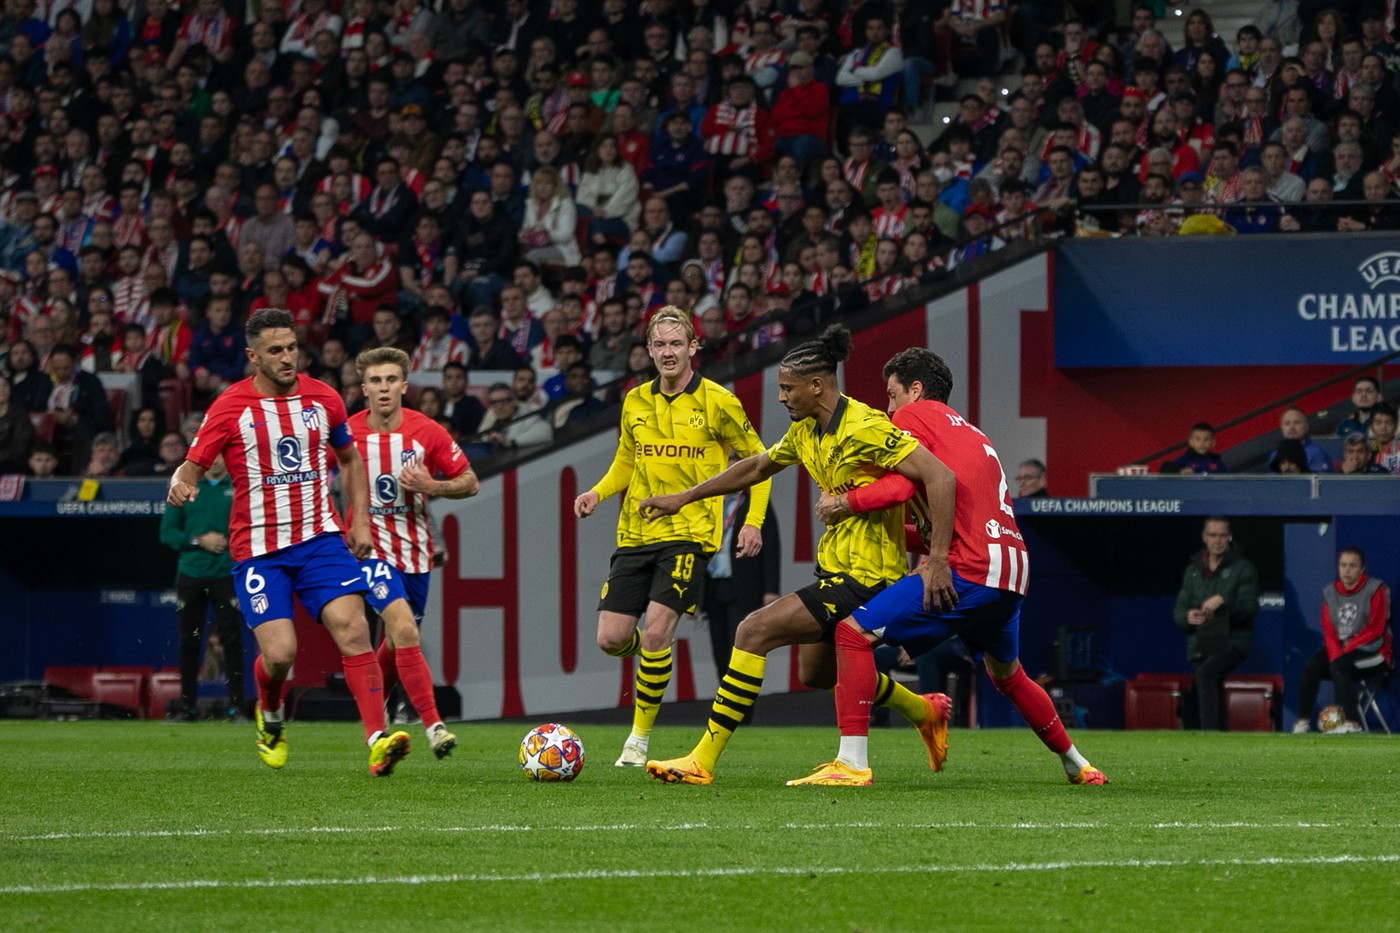 April 10, 2024, Madrid, Spain: Sébastien Haller (C), Borussia Dotmund player, defends a ball under pressure from Stefan Savi? (2) and the gaze of Julian Brandt (19), Borussia player, and Koke (6) and Rodrigo Riquelme, (24), Atlético players of Madrid during the first leg of the quarterfinals of the UEFA Champions League played at the Metropolitano stadium in Madrid. First leg match for the quarterfinals of the UEFA Champions League played at the Metropolitan Stadium in Madrid between Atlético de Madrid and the German Borusia Dormund with a score of 2 goals to 1 for the local team with goals from Rodrigo de Paul (4' ) and Samuel Lino (32') for the ATM and Sebastian Haller (81') for the visitors.,Image: 864050000, License: Rights-managed, Restrictions: , Model Release: no, Credit line: David Canales / Zuma Press / Profimedia